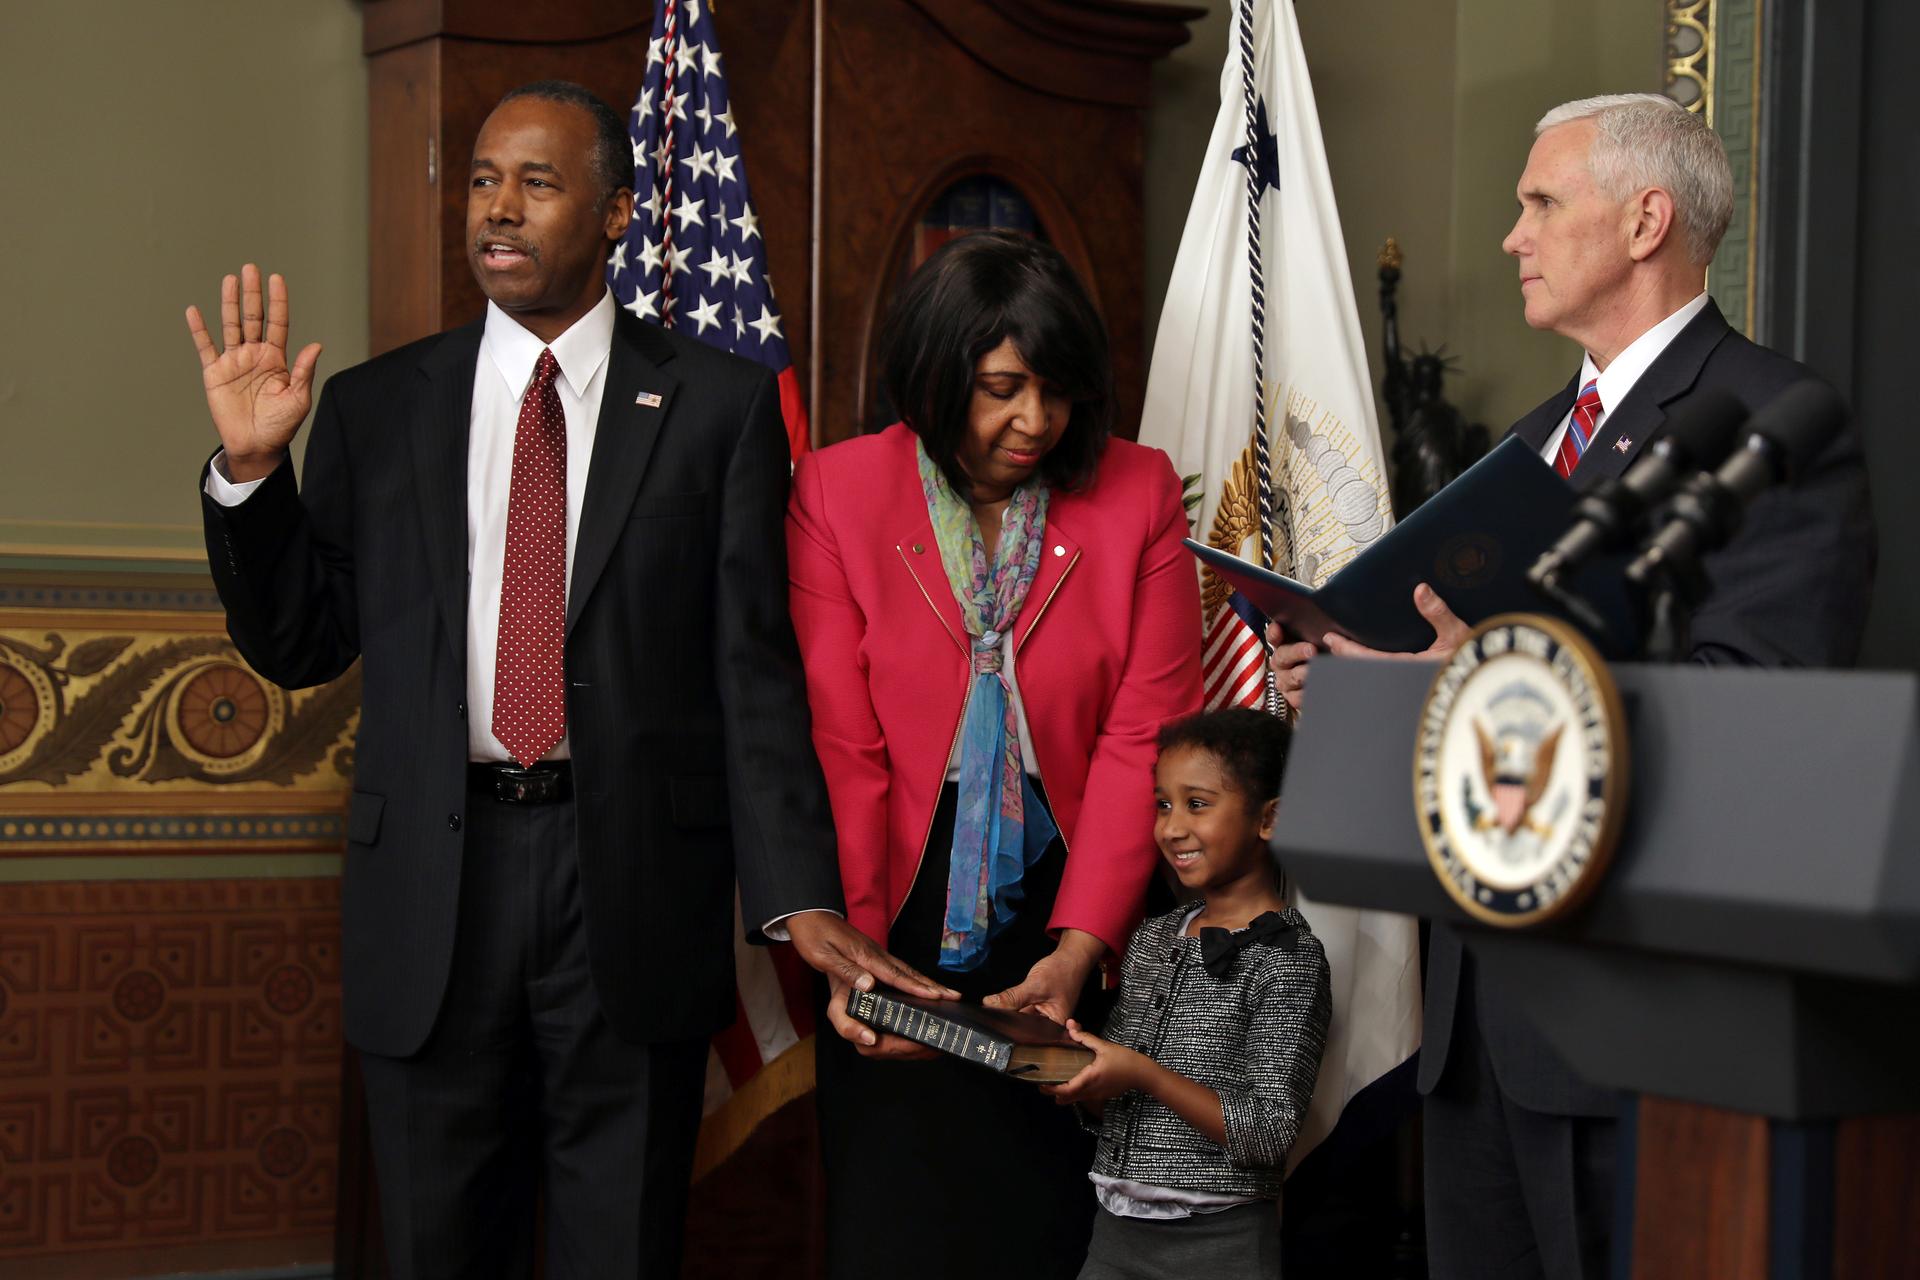 Ben Carson, the new secretary of HUD is sworn in by VP Mike Pence